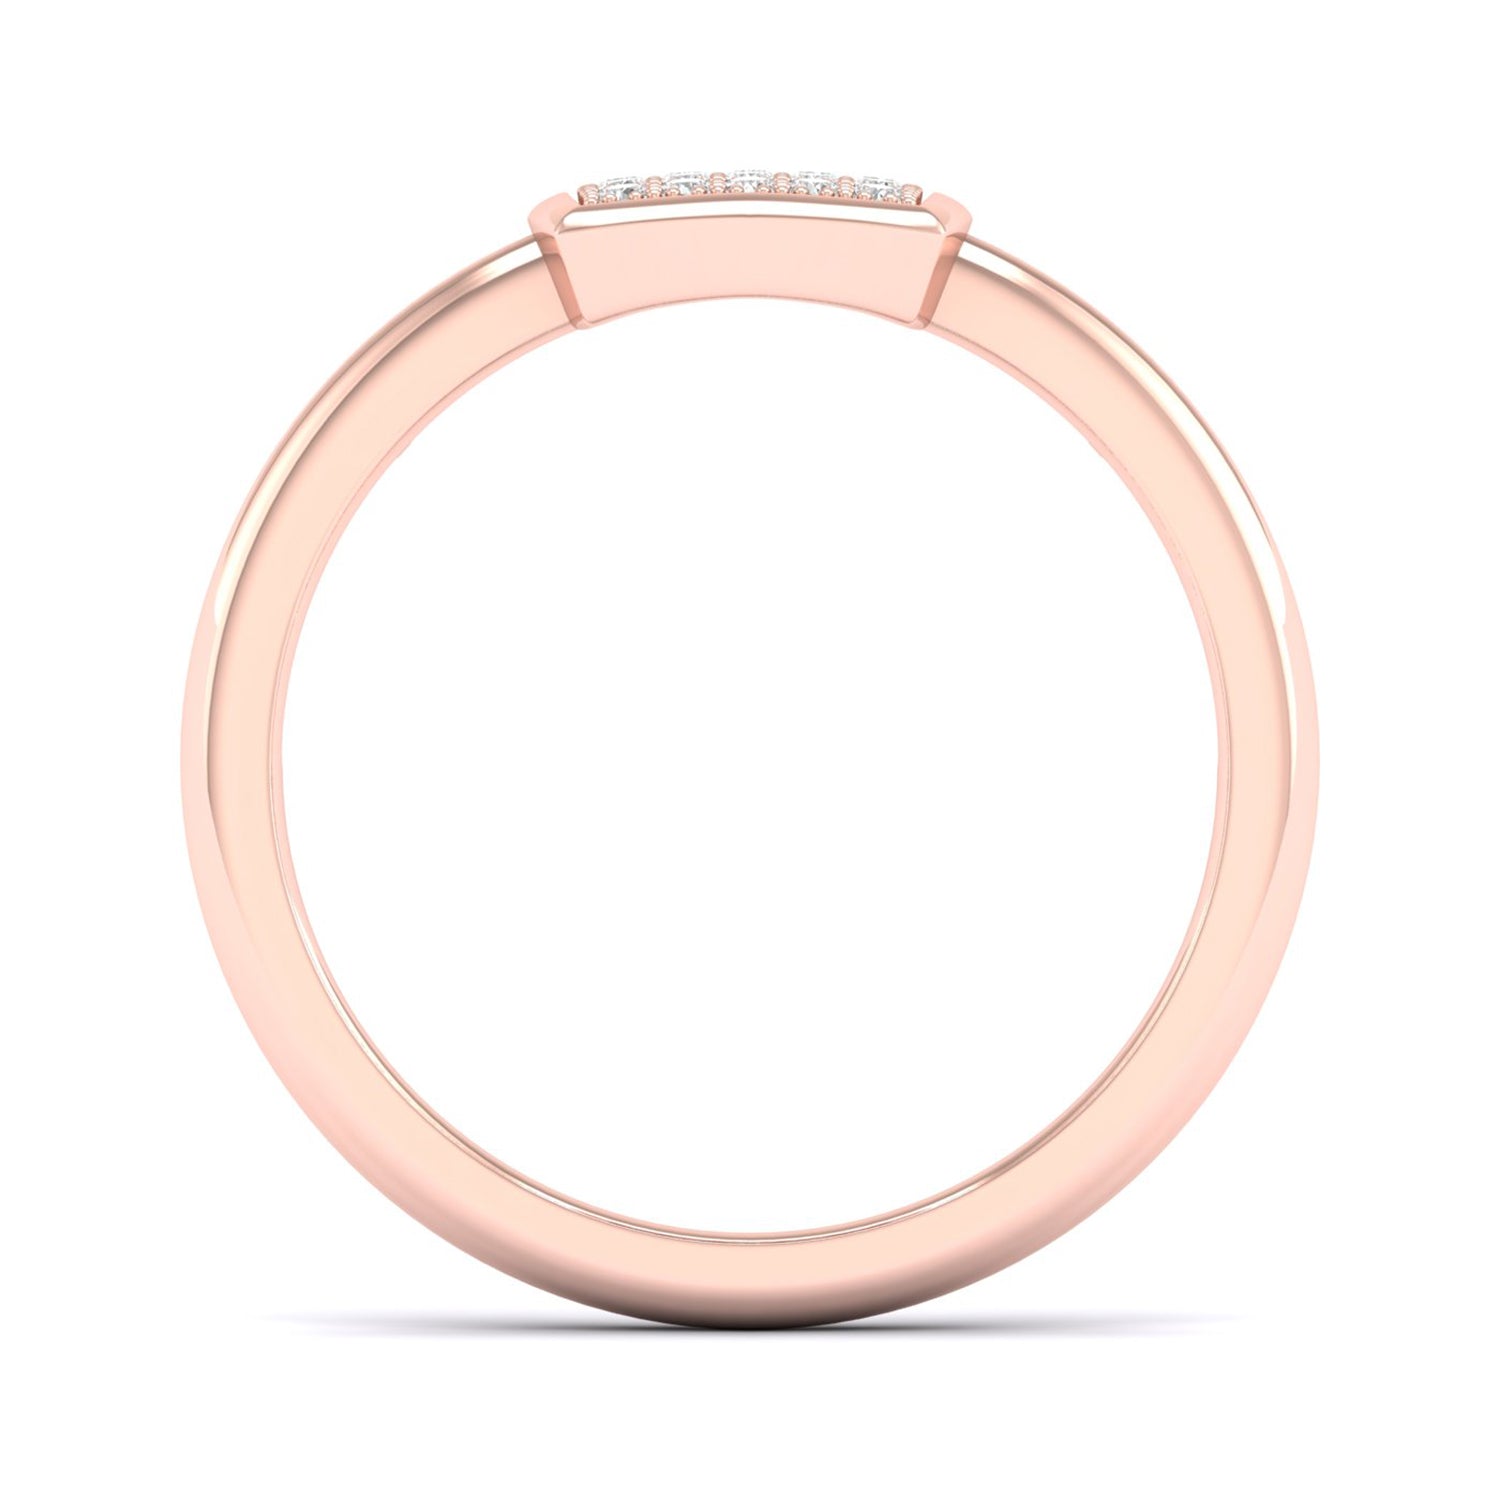 Essential 4-Pronged Round Ring_Product Angle_1/10 Ct. - 2